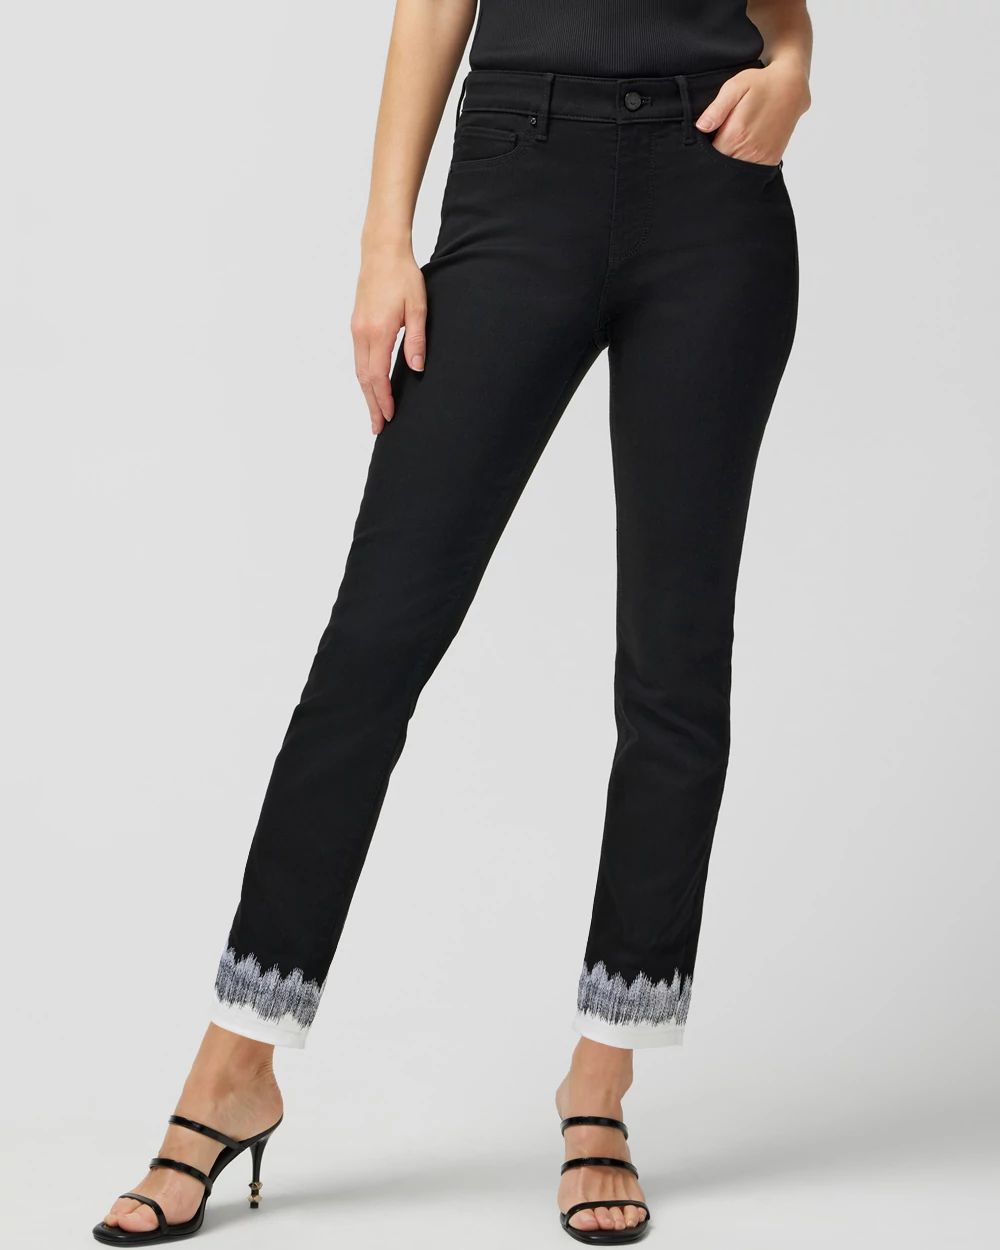 High-Rise Embroidered Cuff Slim Crop Jeans click to view larger image.